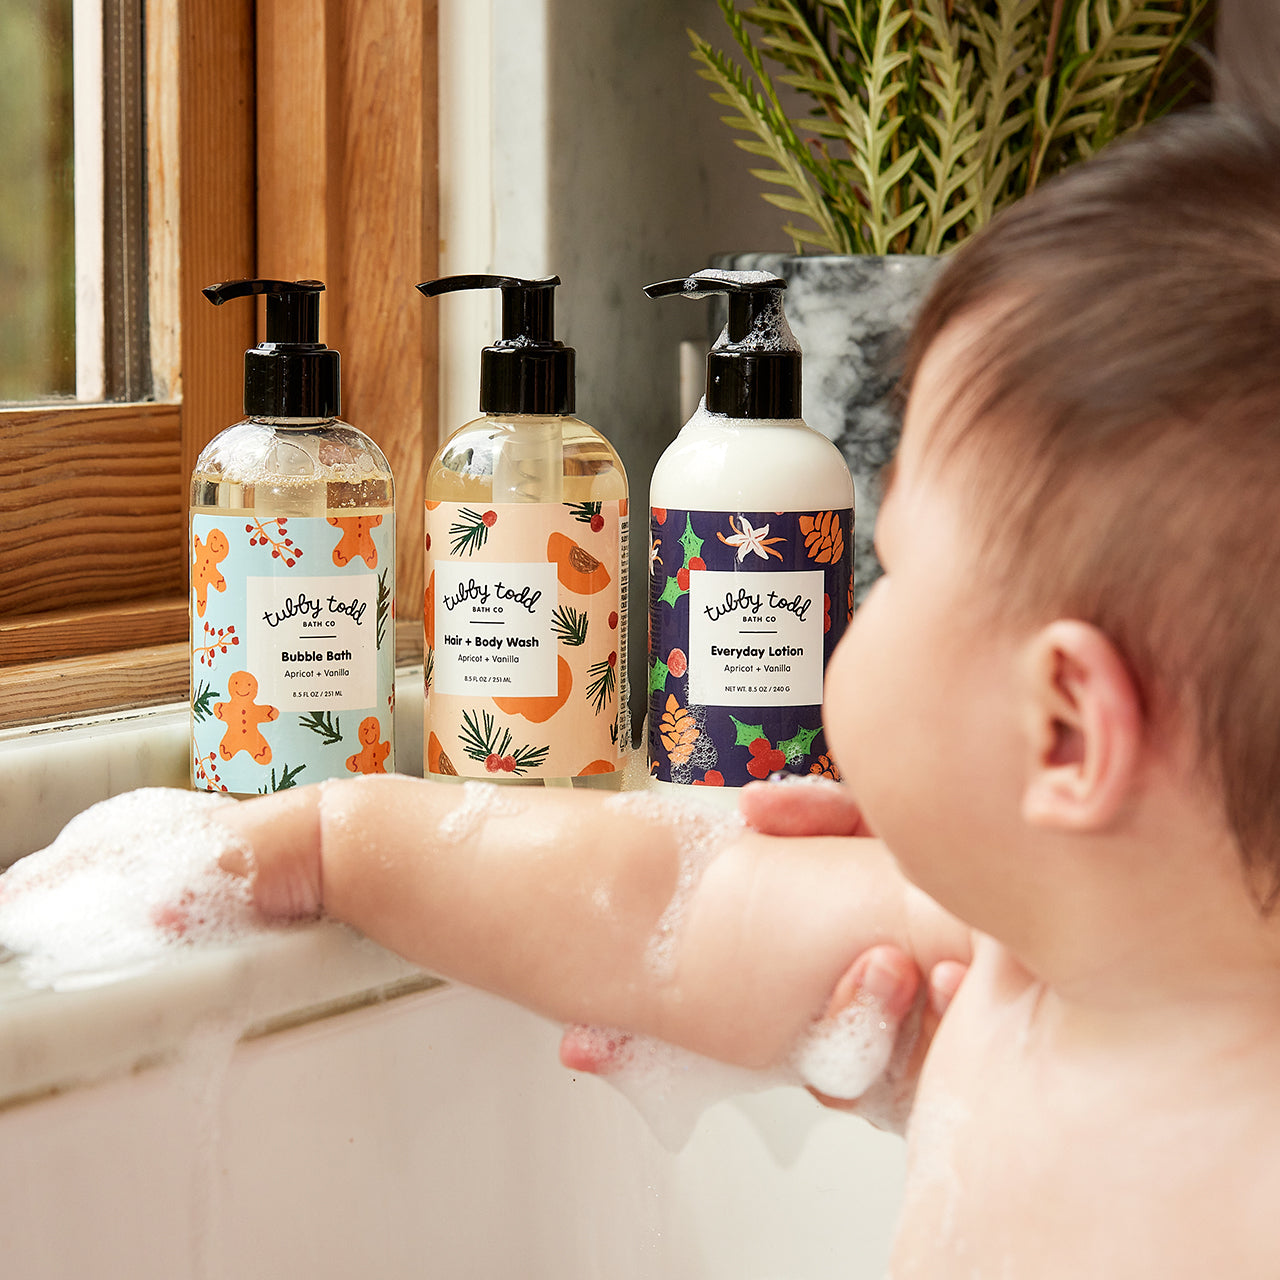 Baby boy with bubbles on his arms looking at the bottle of Tubby Evergreen bottles in the sink.